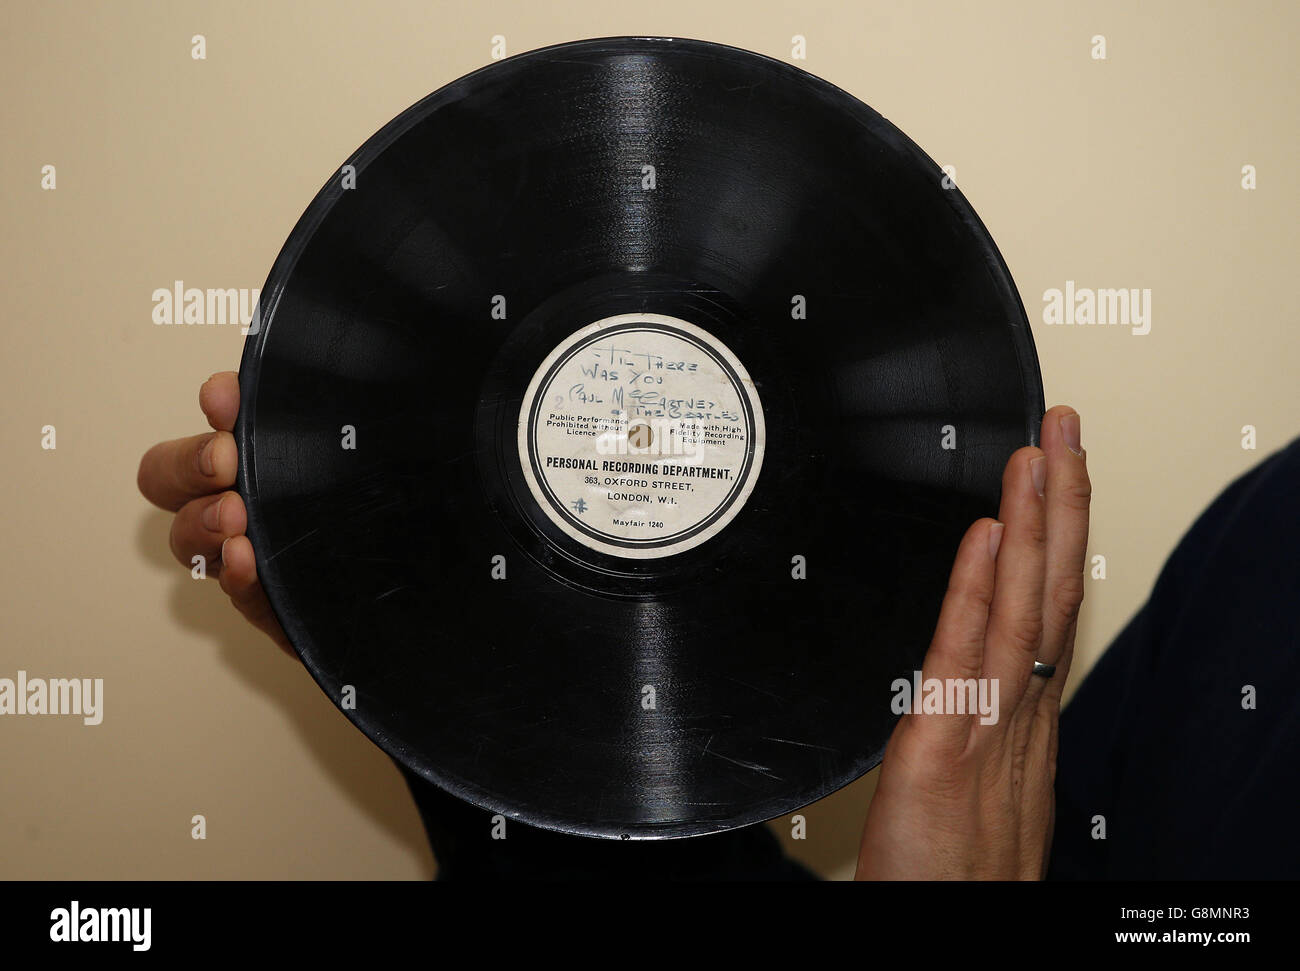 The record that launched The Beatles, One of the rarest and most collectable of all Beatles records is expected to sell for over £10,000 when it comes up for sale next month. The unique ten-inch 78RPM acetate featuring 'Hello Little Girl' on one side and 'Till There Was You' on the other was pressed at the HMV record store on Oxford St London before being presented by the group's manager Brian Epstein to George Martin (EMI) in his desperate attempt to get them a recording contract. Paul Fairweather from Omega Auctions with the record before it is sold.. Stock Photo